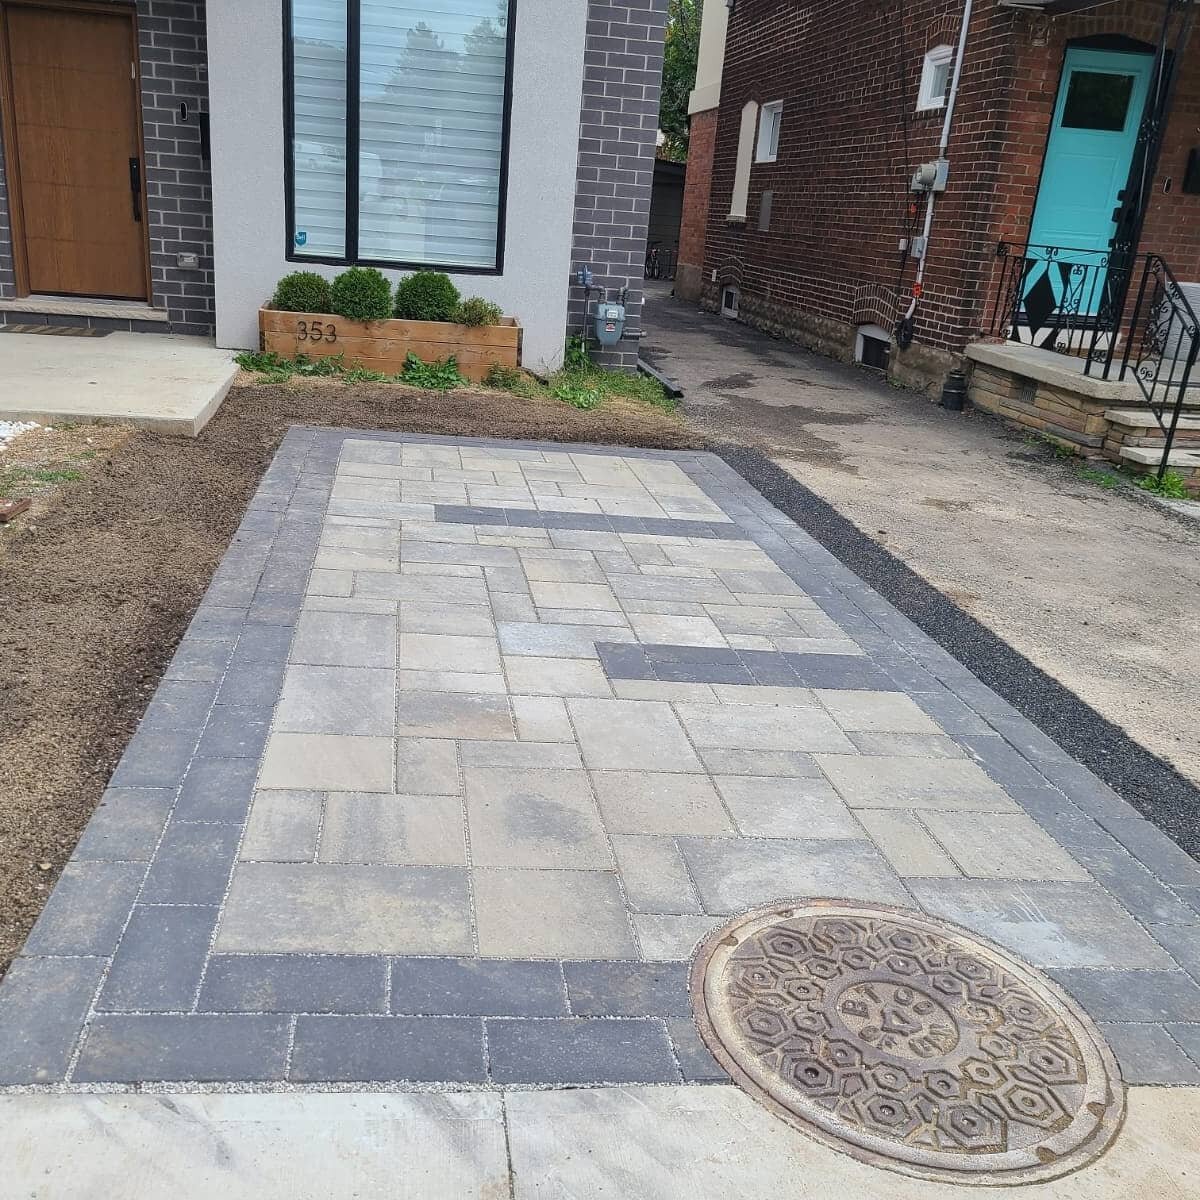 In need of extra driveway space? Check out this permeable parking pad we completed with custom accent strips👷#kingsgrovecontracting👊 
.
.
.
.
#parkingpad #hardscapedesign  #hardscape #sixcontractor  #contrustion #canadianbusiness #ontario #ontarioc